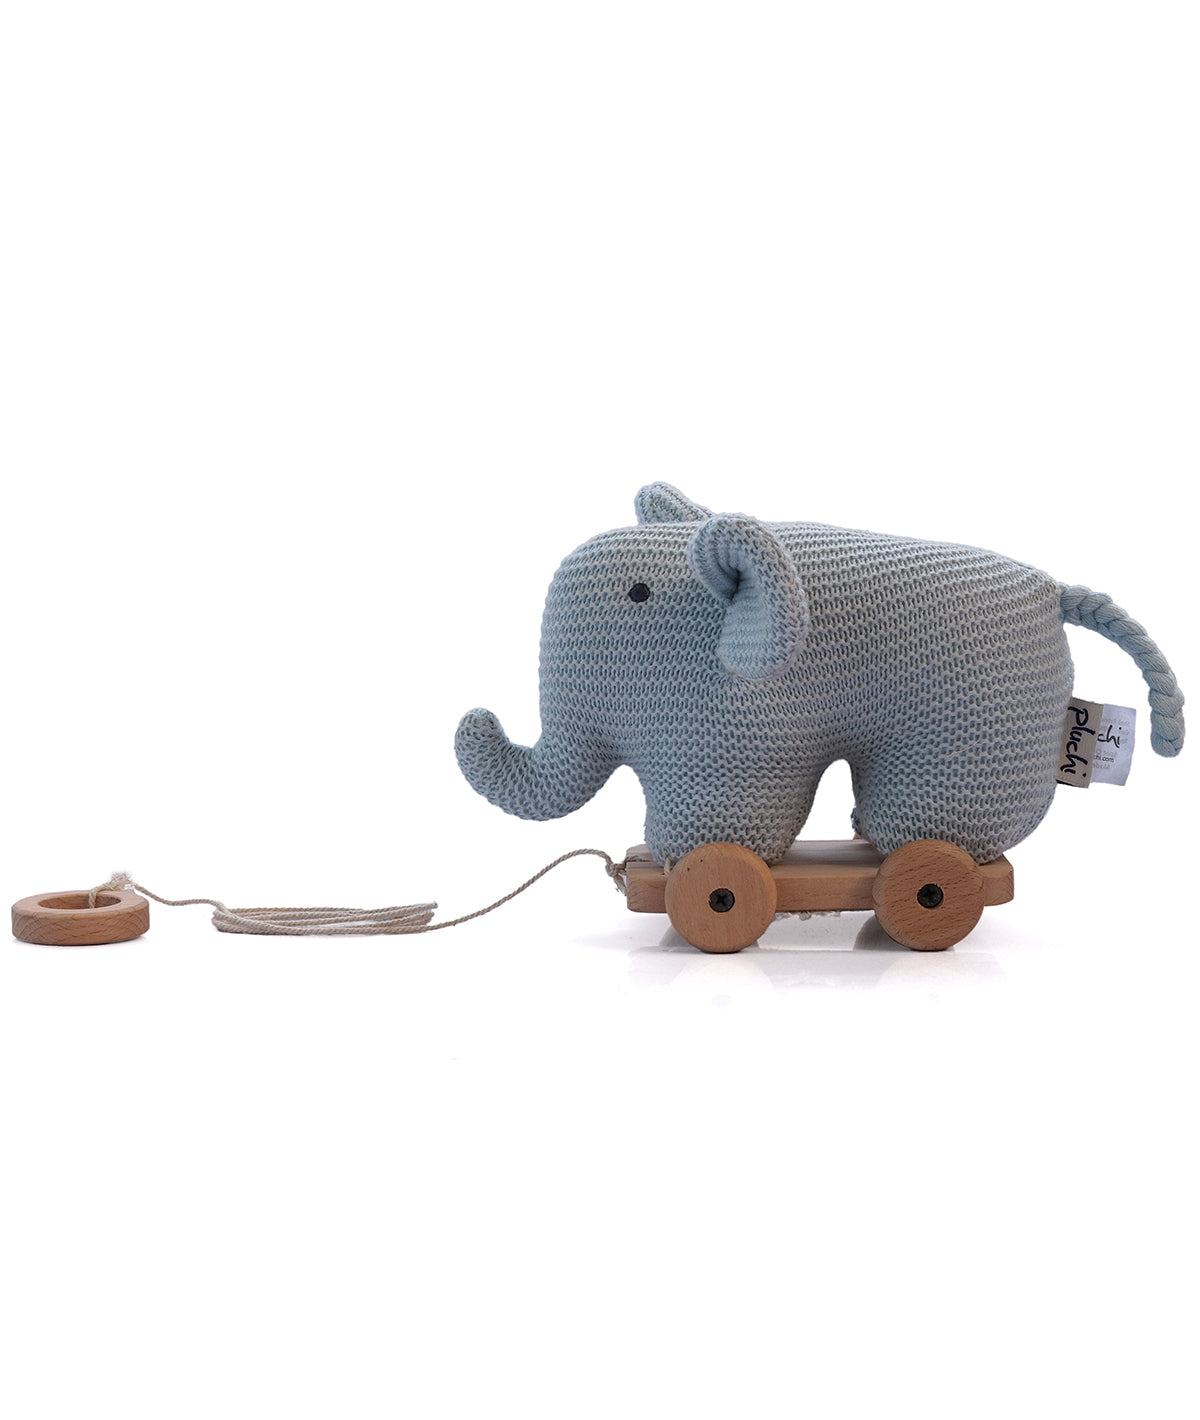 Push & Pull Elephant - Light Blue 100% Cotton Knitted Stuffed Soft Toy for Babies / Kids with Wooden Cart